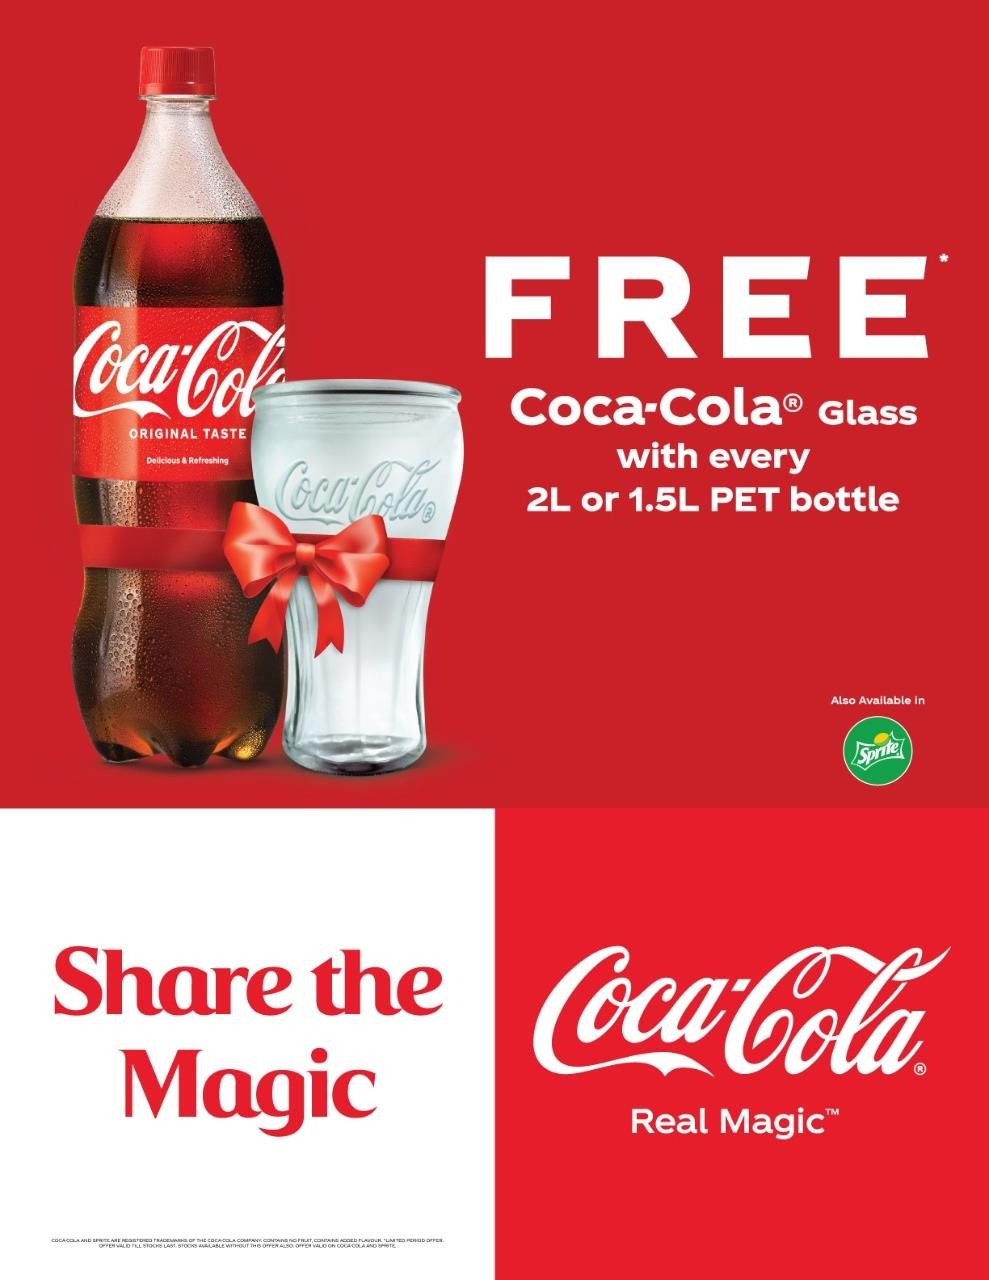 Coca-Cola's Free Tumbler With Every 1.5L And 2L Coke Or Sprite PET Bottle